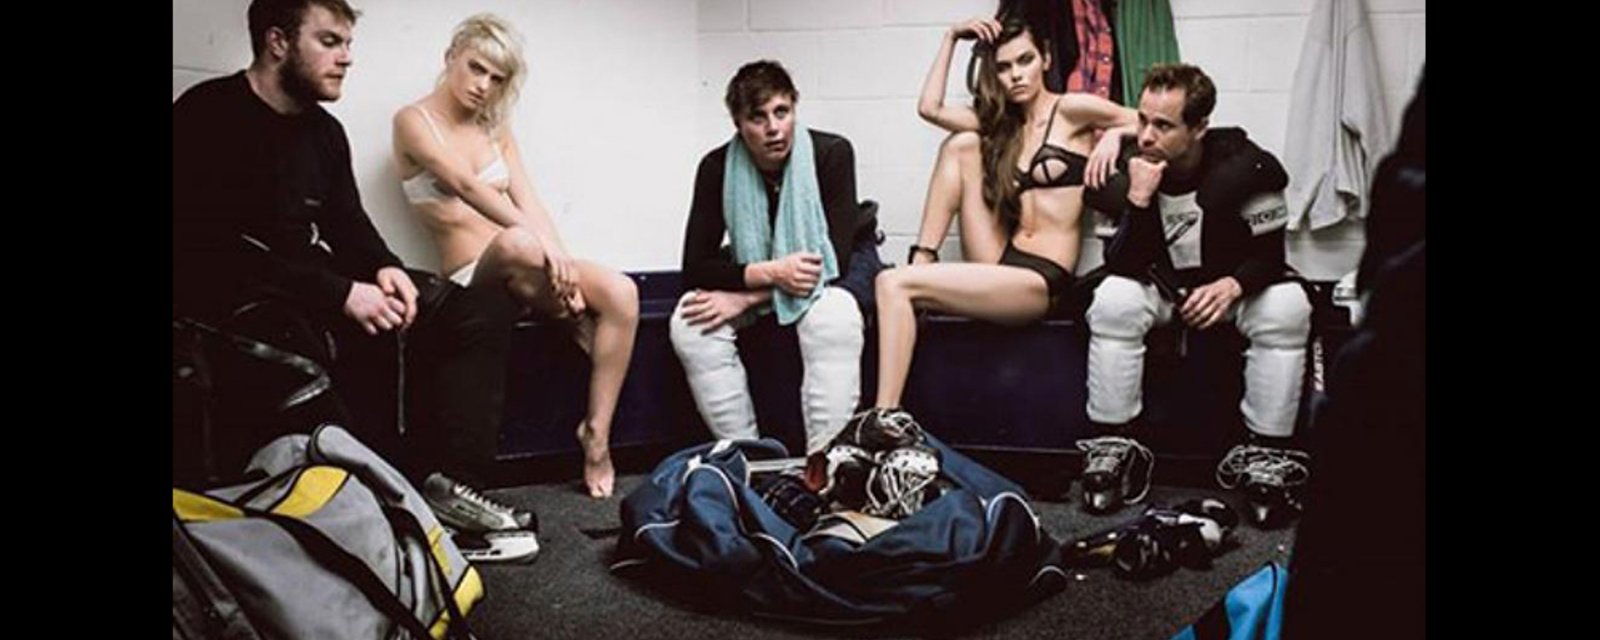 Must See: Lingerie company releases hockey-themed line 